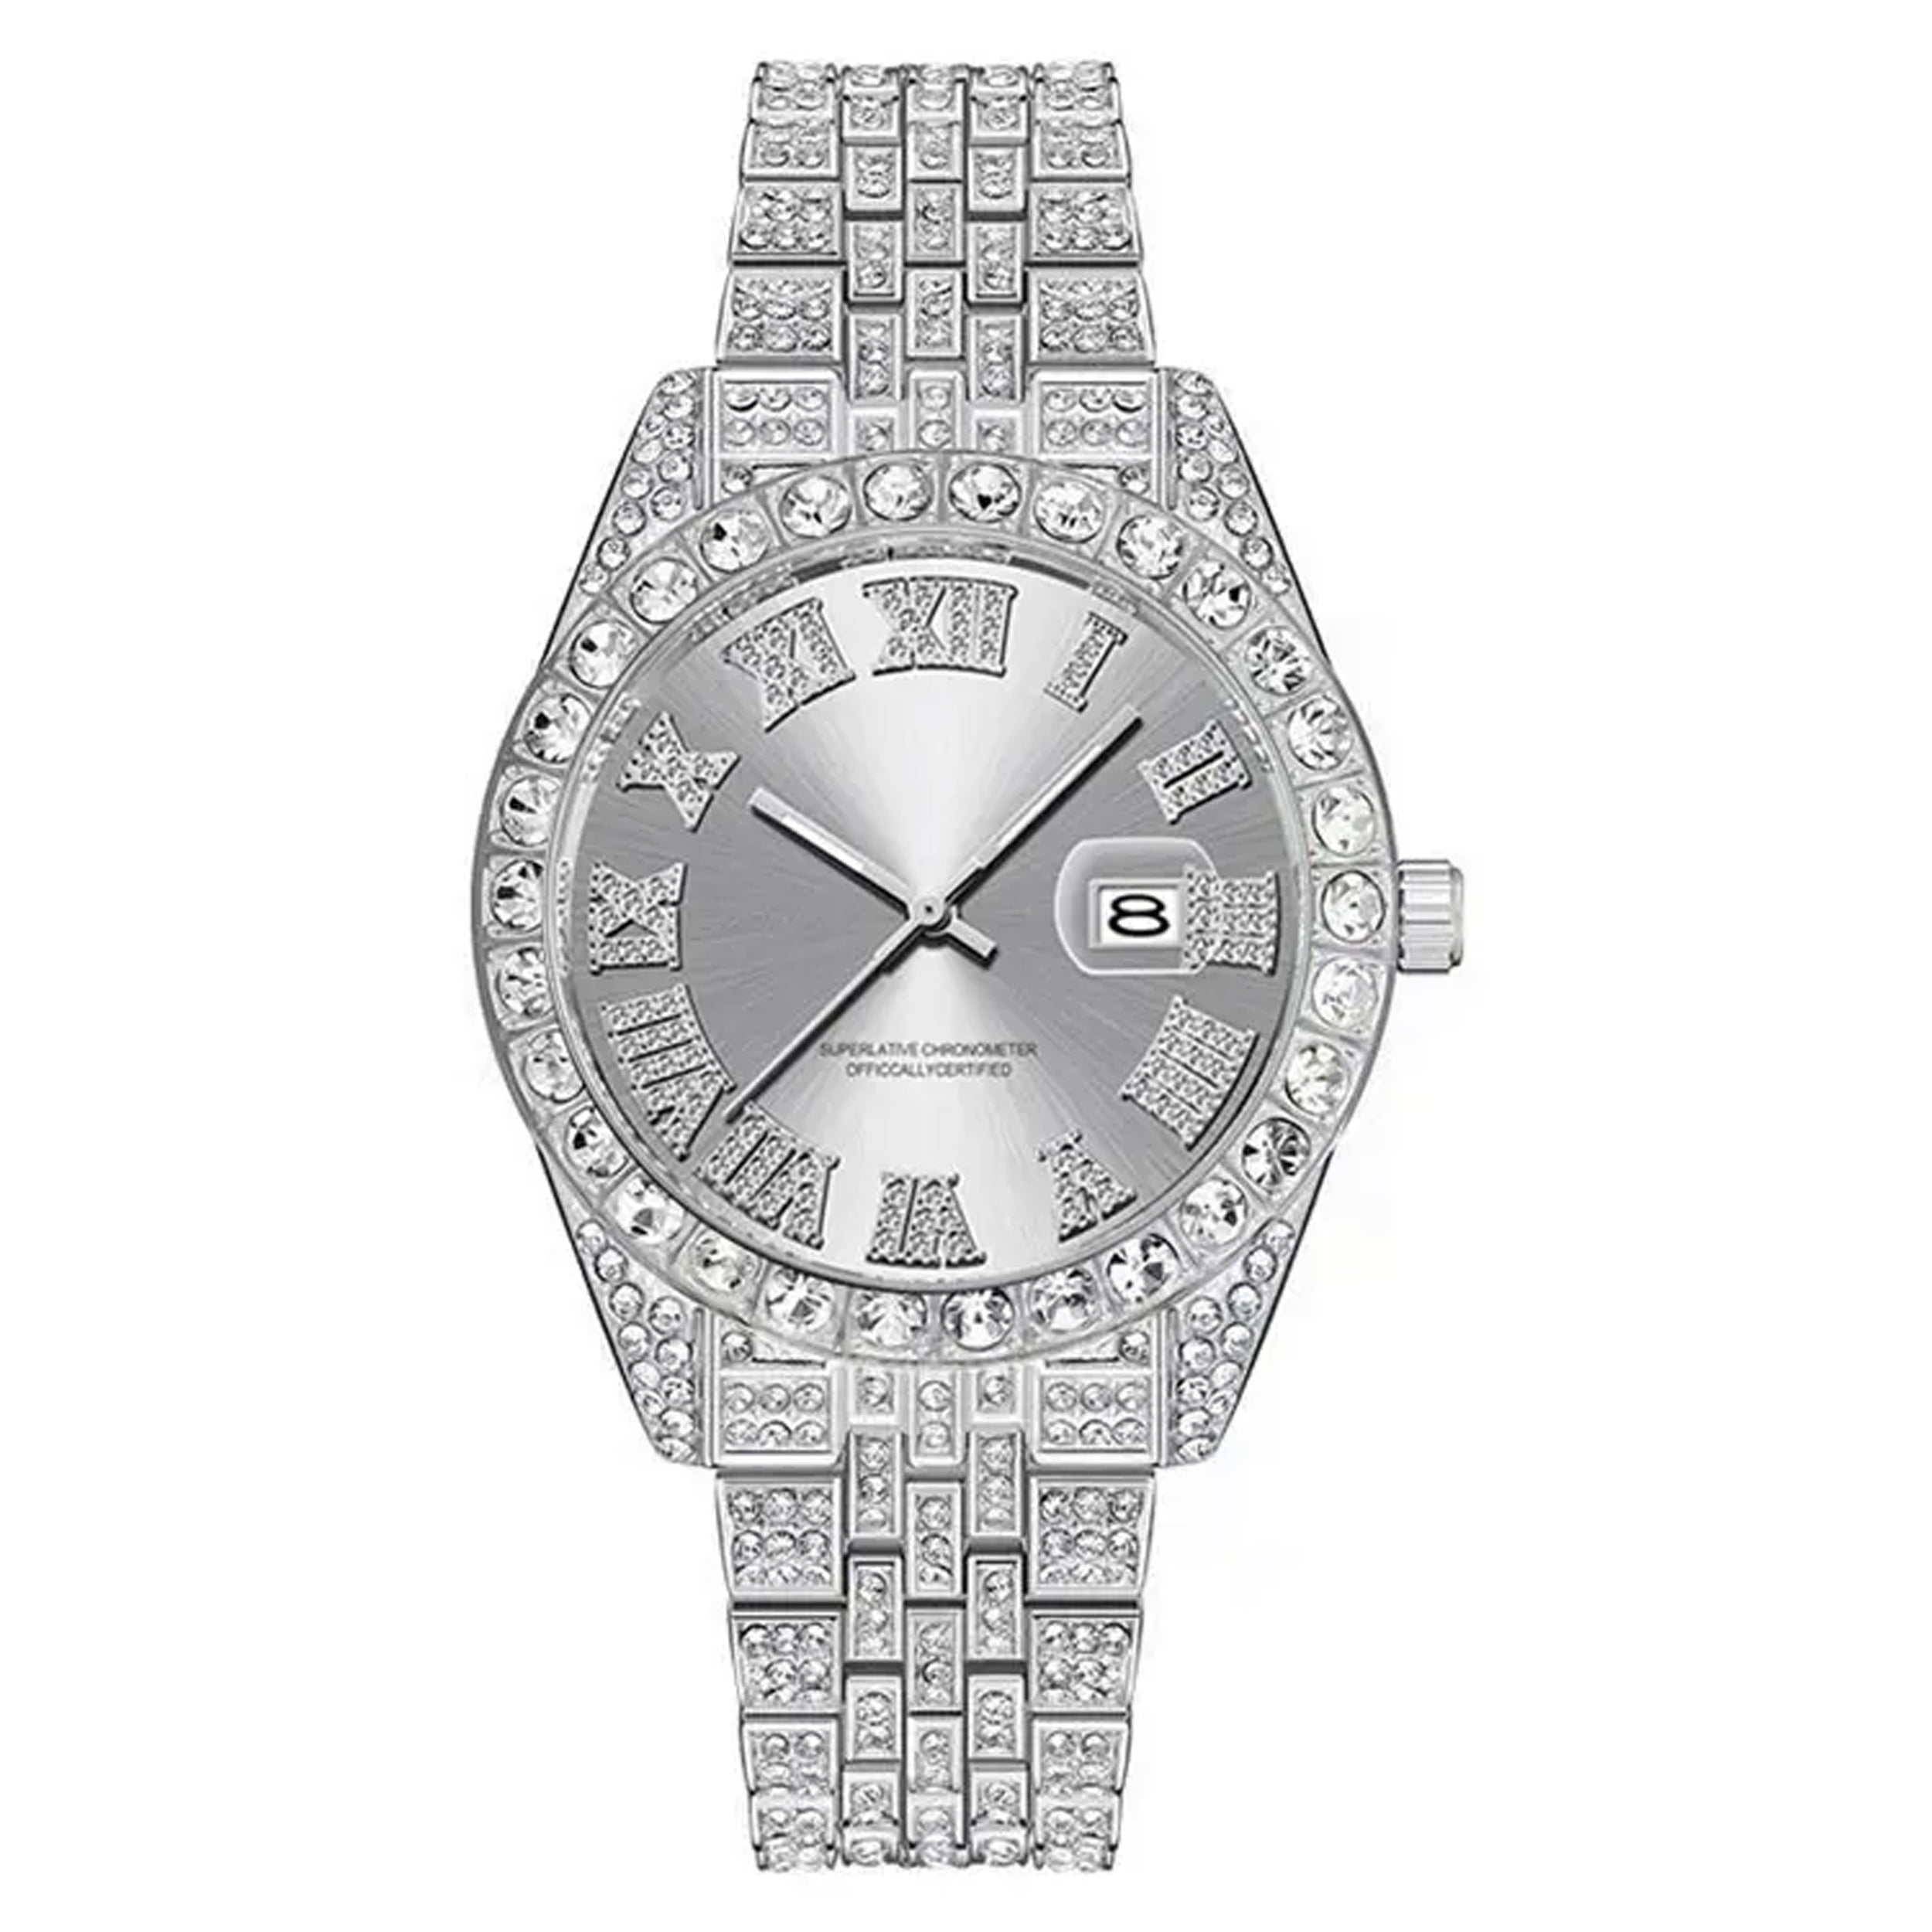 Stay on Time and on Trend with the Square Quartz Waterproof Wristwatch Assorted